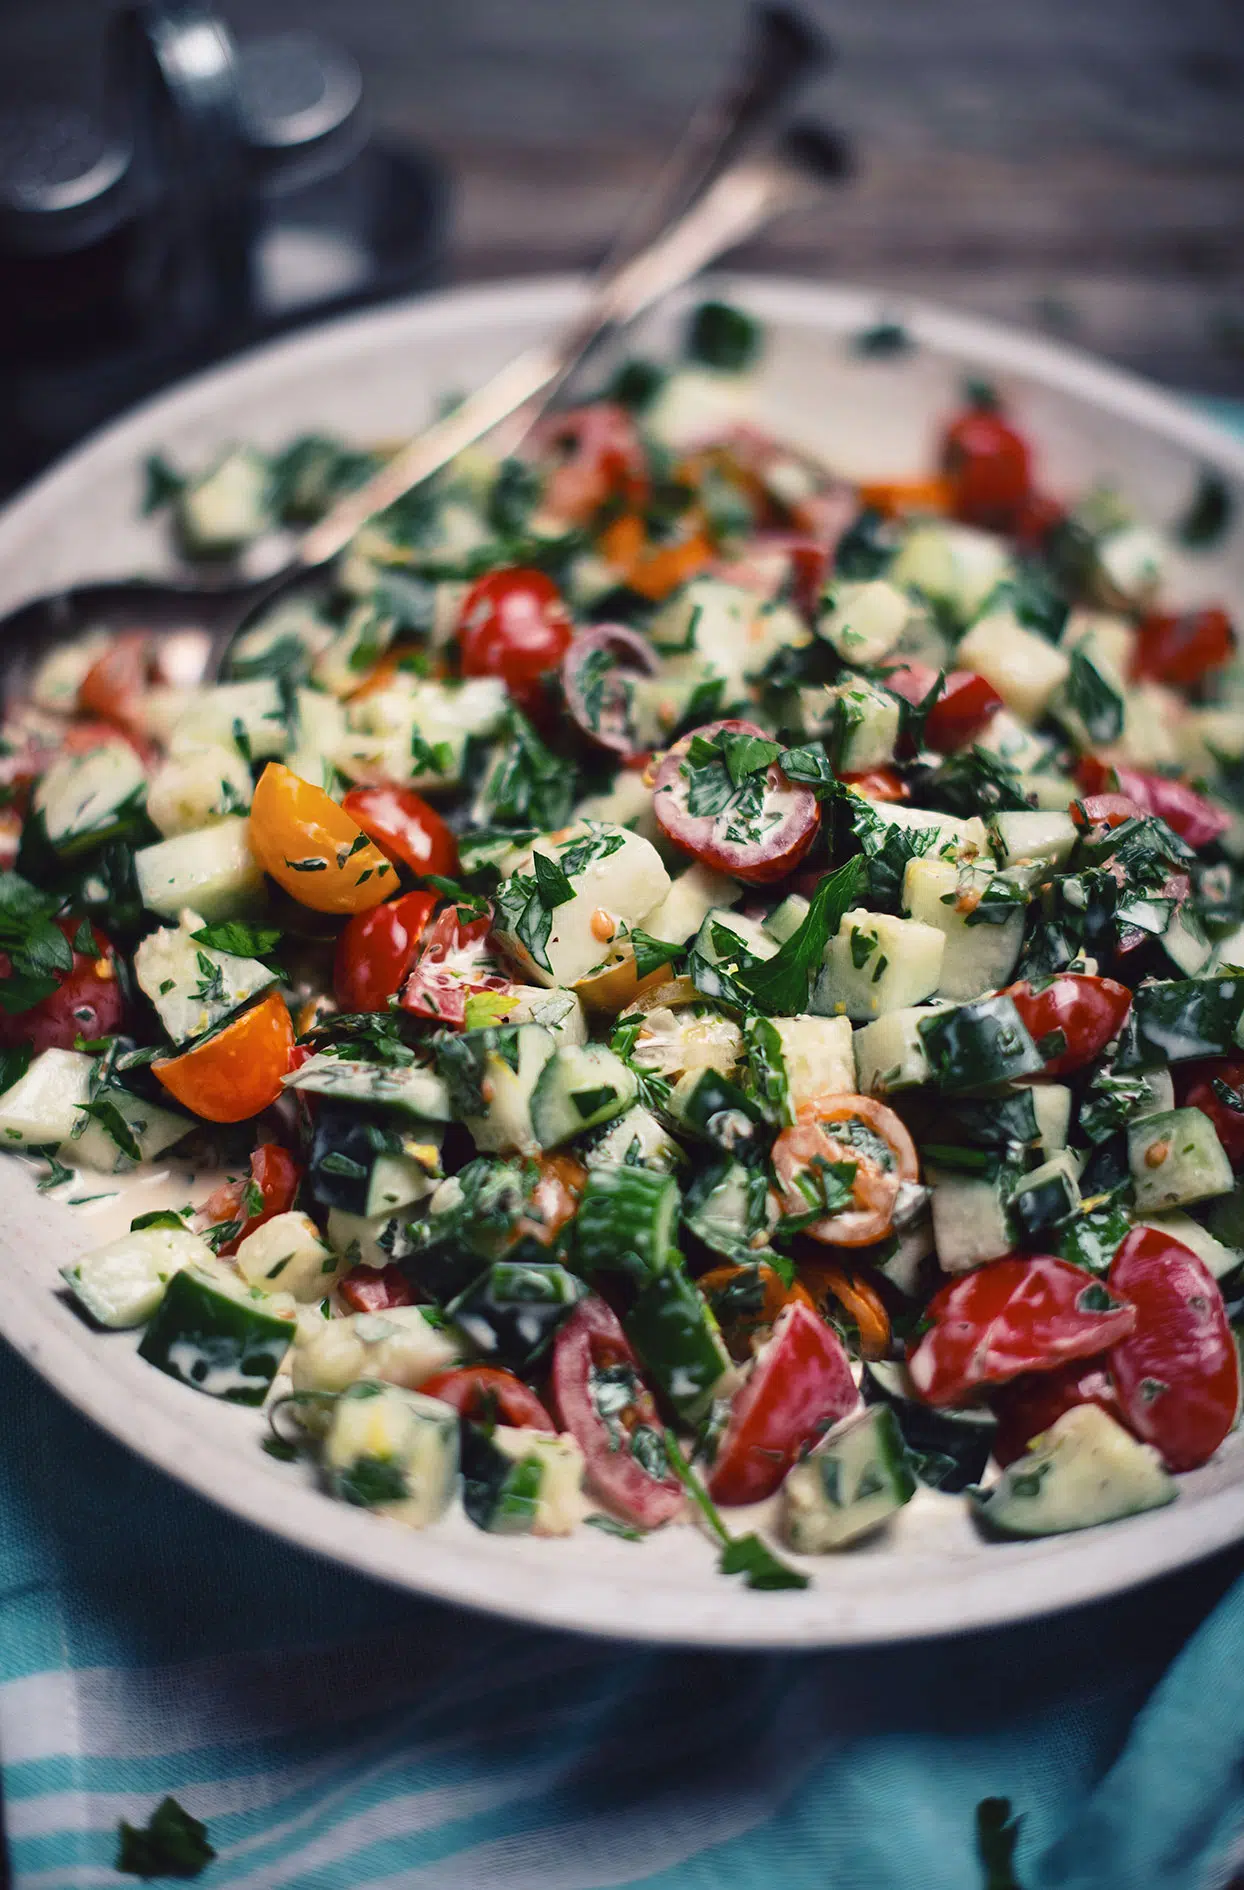 Creamy cucumber, tomato and herb salad with cider vinaigrette